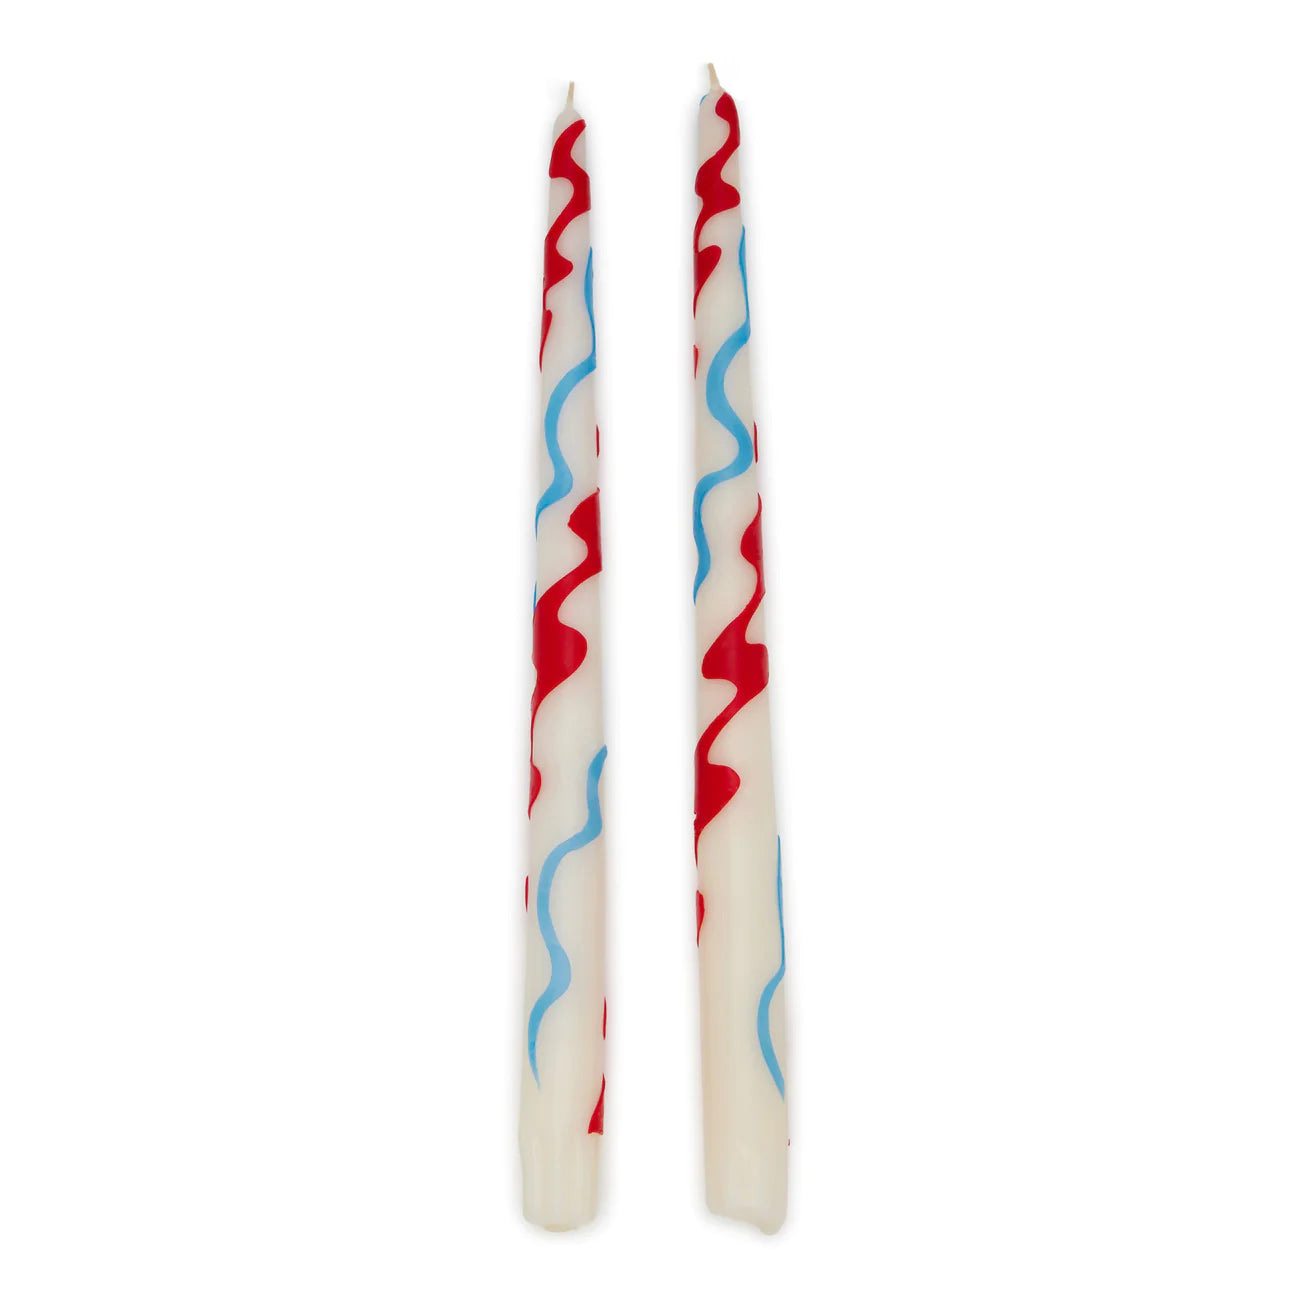 Hand-Applied Wax Découpage Taper Candles, Set of 2